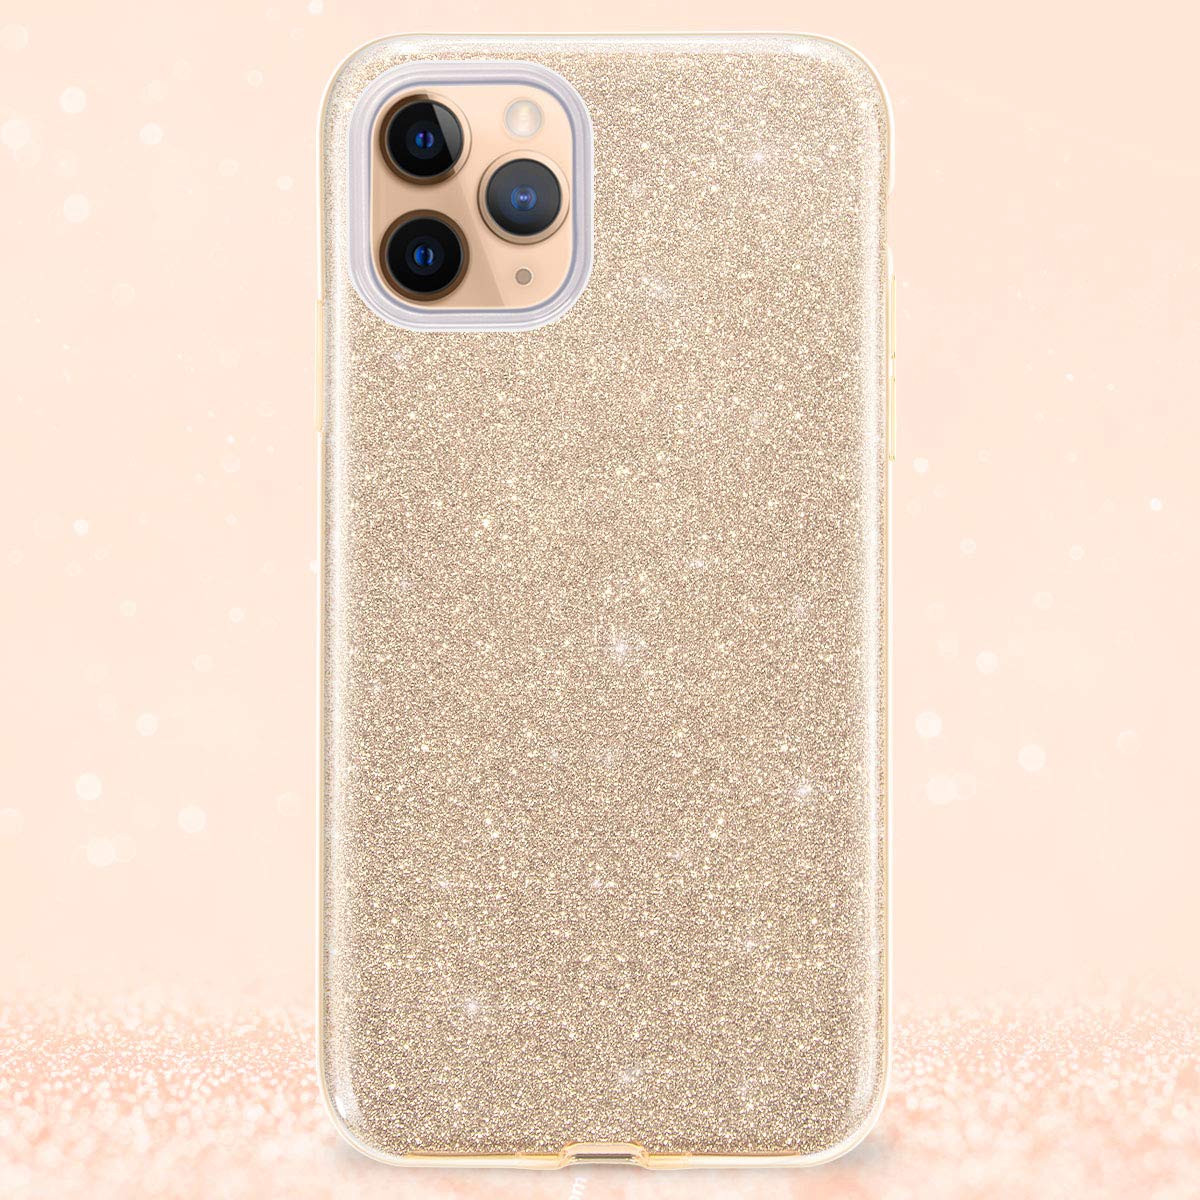 MILPROX Case Compatible for iPhone 11 Pro, Bling Sparkly Glitter Luxury Shiny Spark Shell, Protective 3 Layer Hybrid Anti-Slick Slim Soft Cover for iPhone 11 Pro 5.8 inch (2019) -Gold